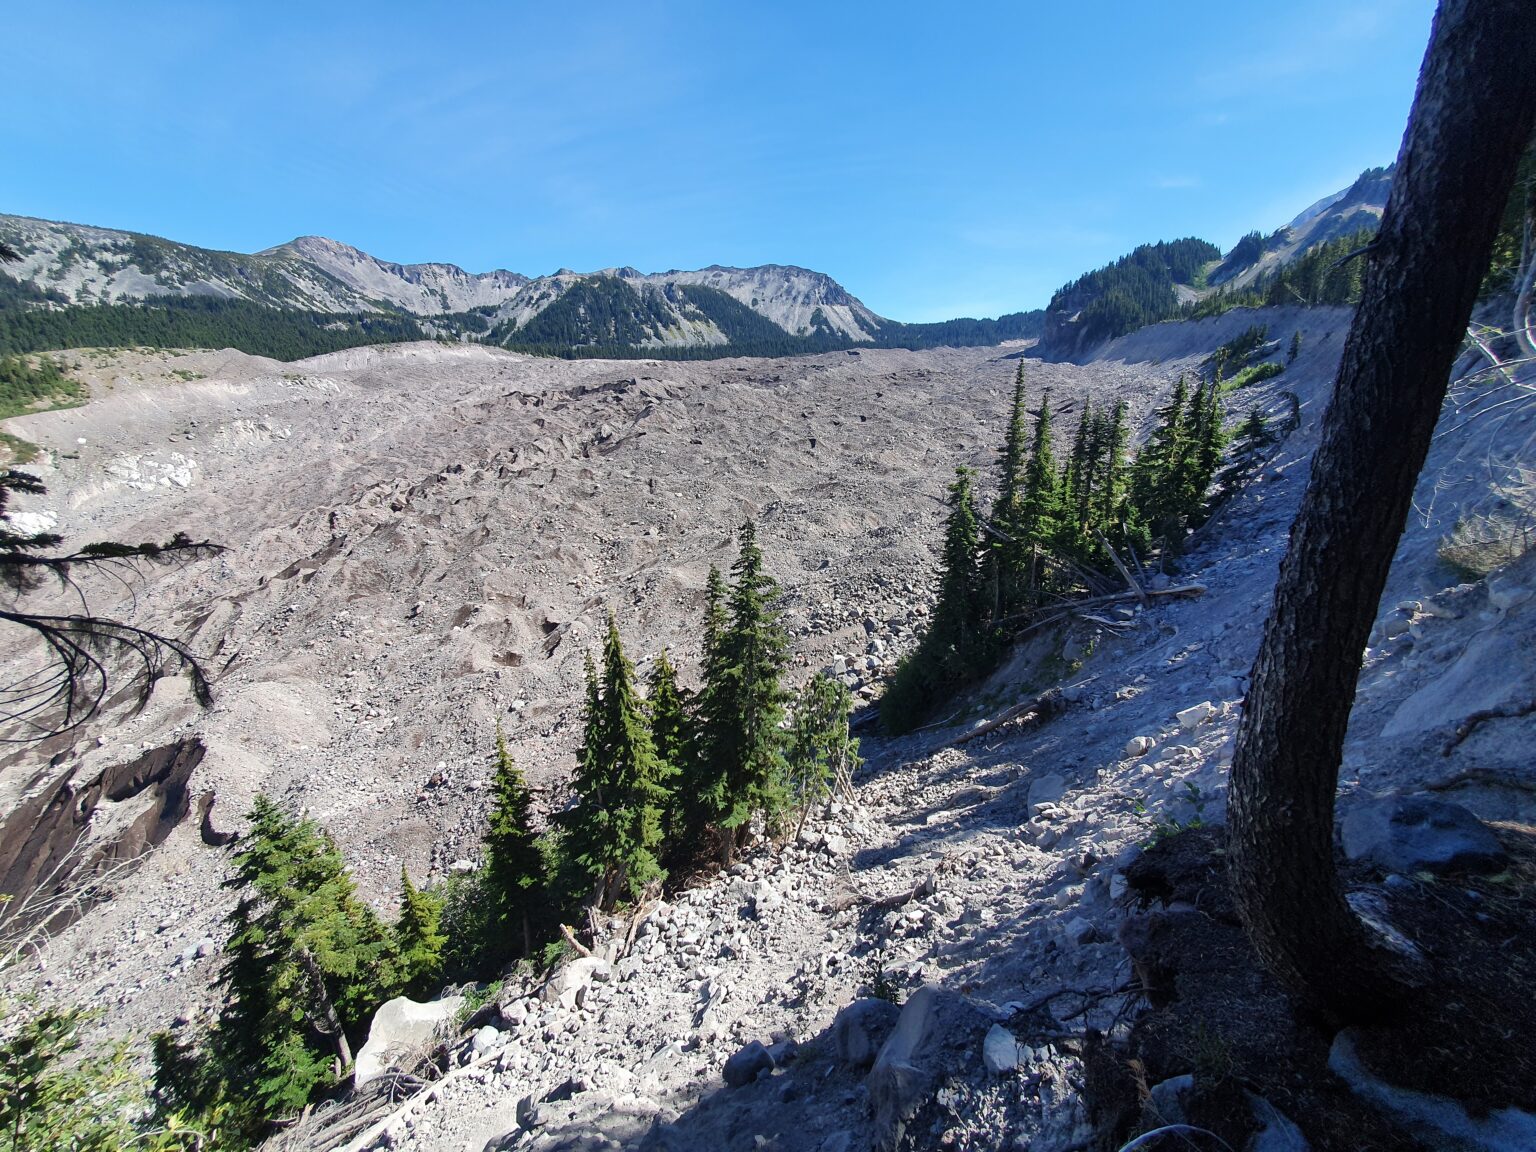 The moraine wall on the west side of the Carbon Glacier